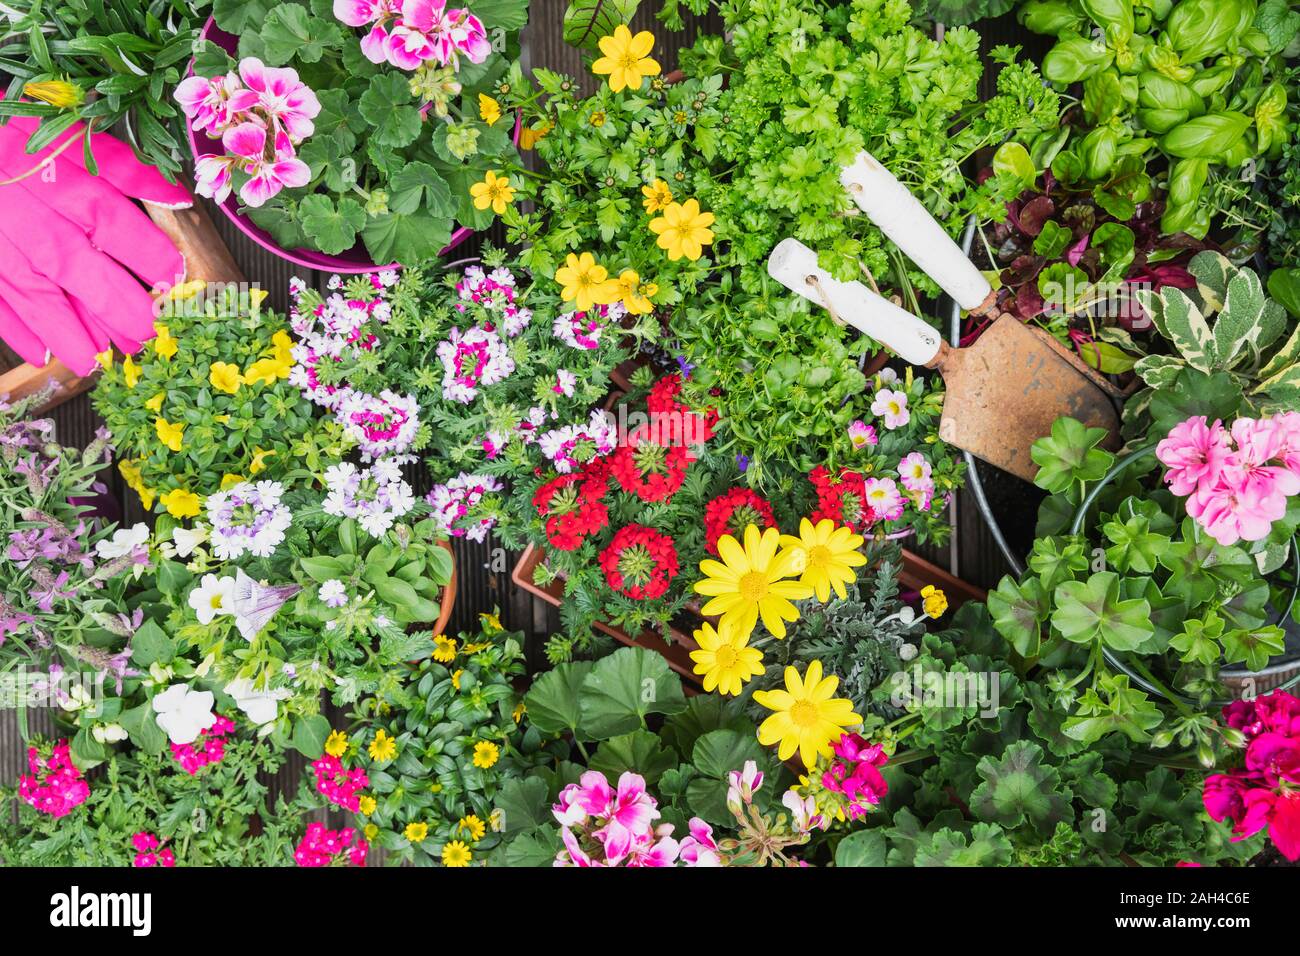 Colorful freshly potted summer flowers and herbs Stock Photo